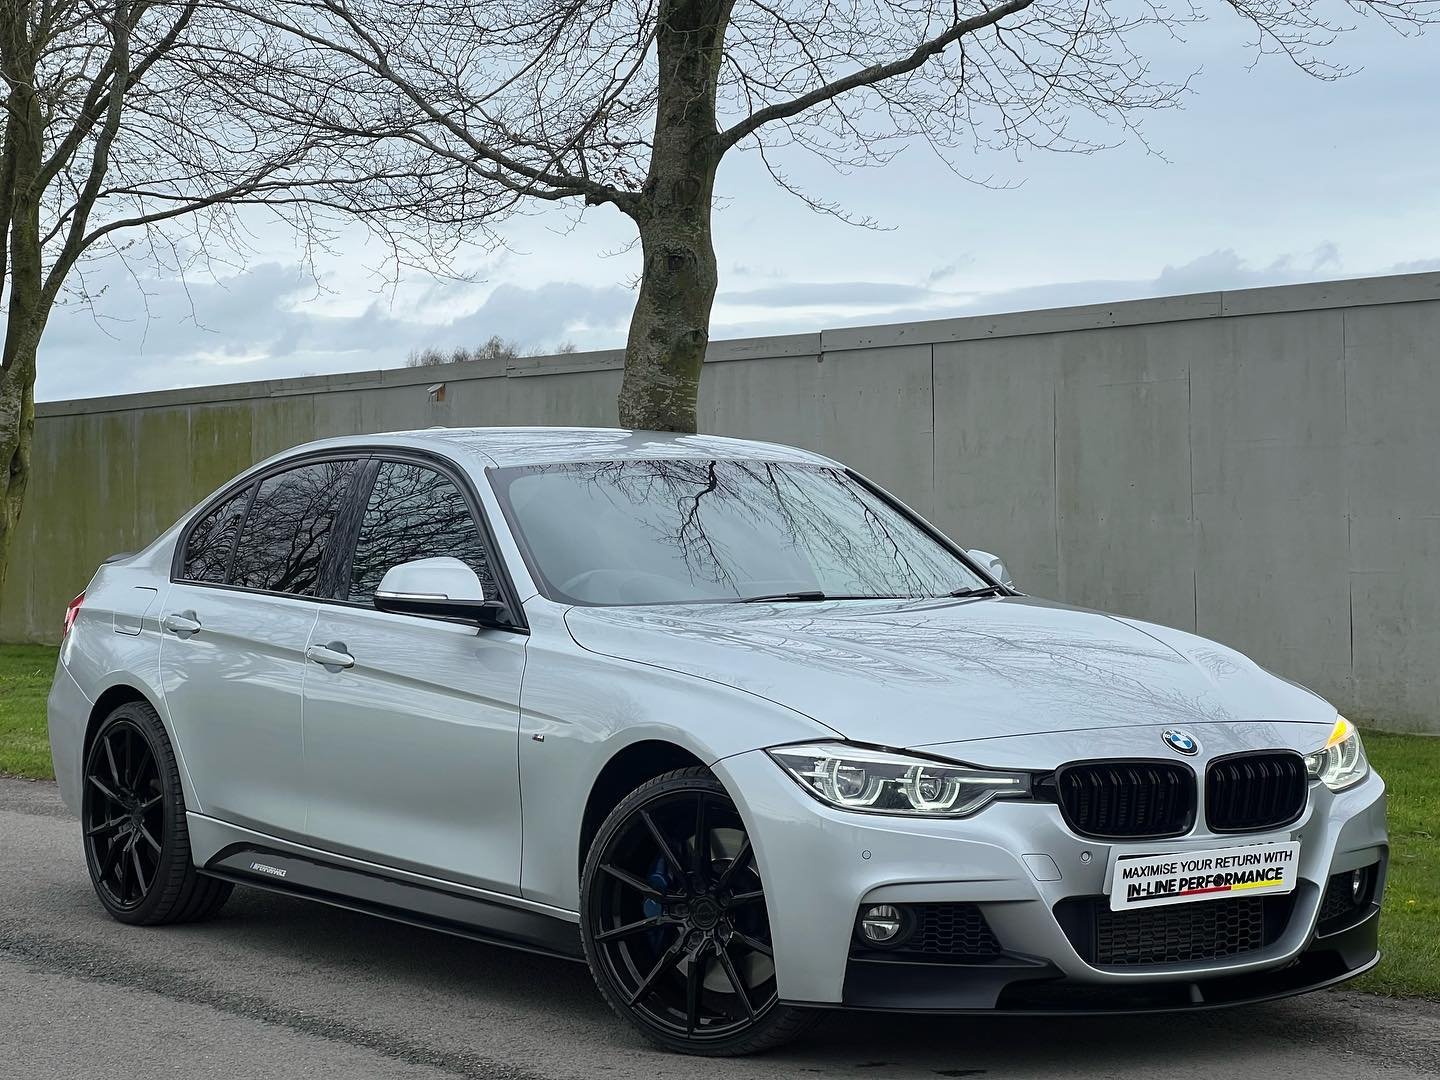 Here At IN-LINE PERFORMANCE We Take Pride And Joy Into Supplying You With Great Quality Of German  Engineering. We Are Proud To Present To You This 2017 BMW 335D Saloon Finished In A Desirable Glacier Silver With Black Dokota Leather Interior.
We hav